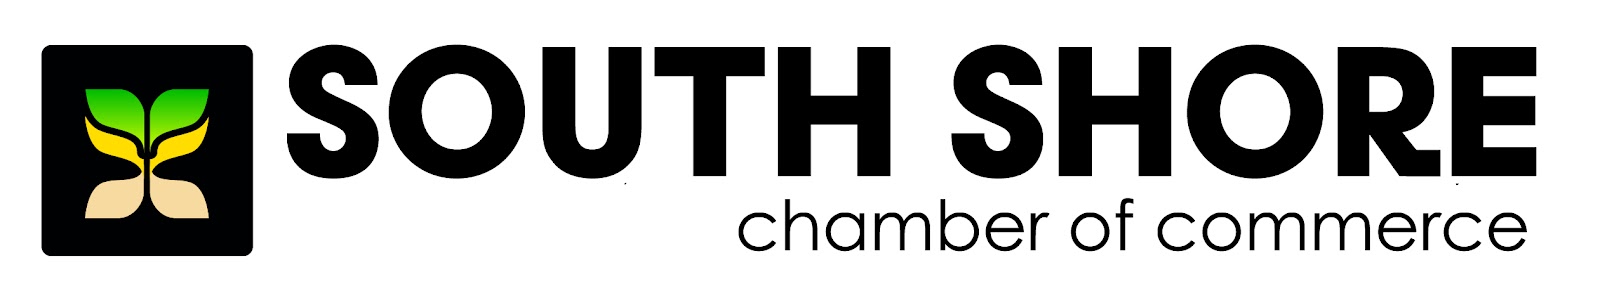 South Shore Chamber of Commerce logo